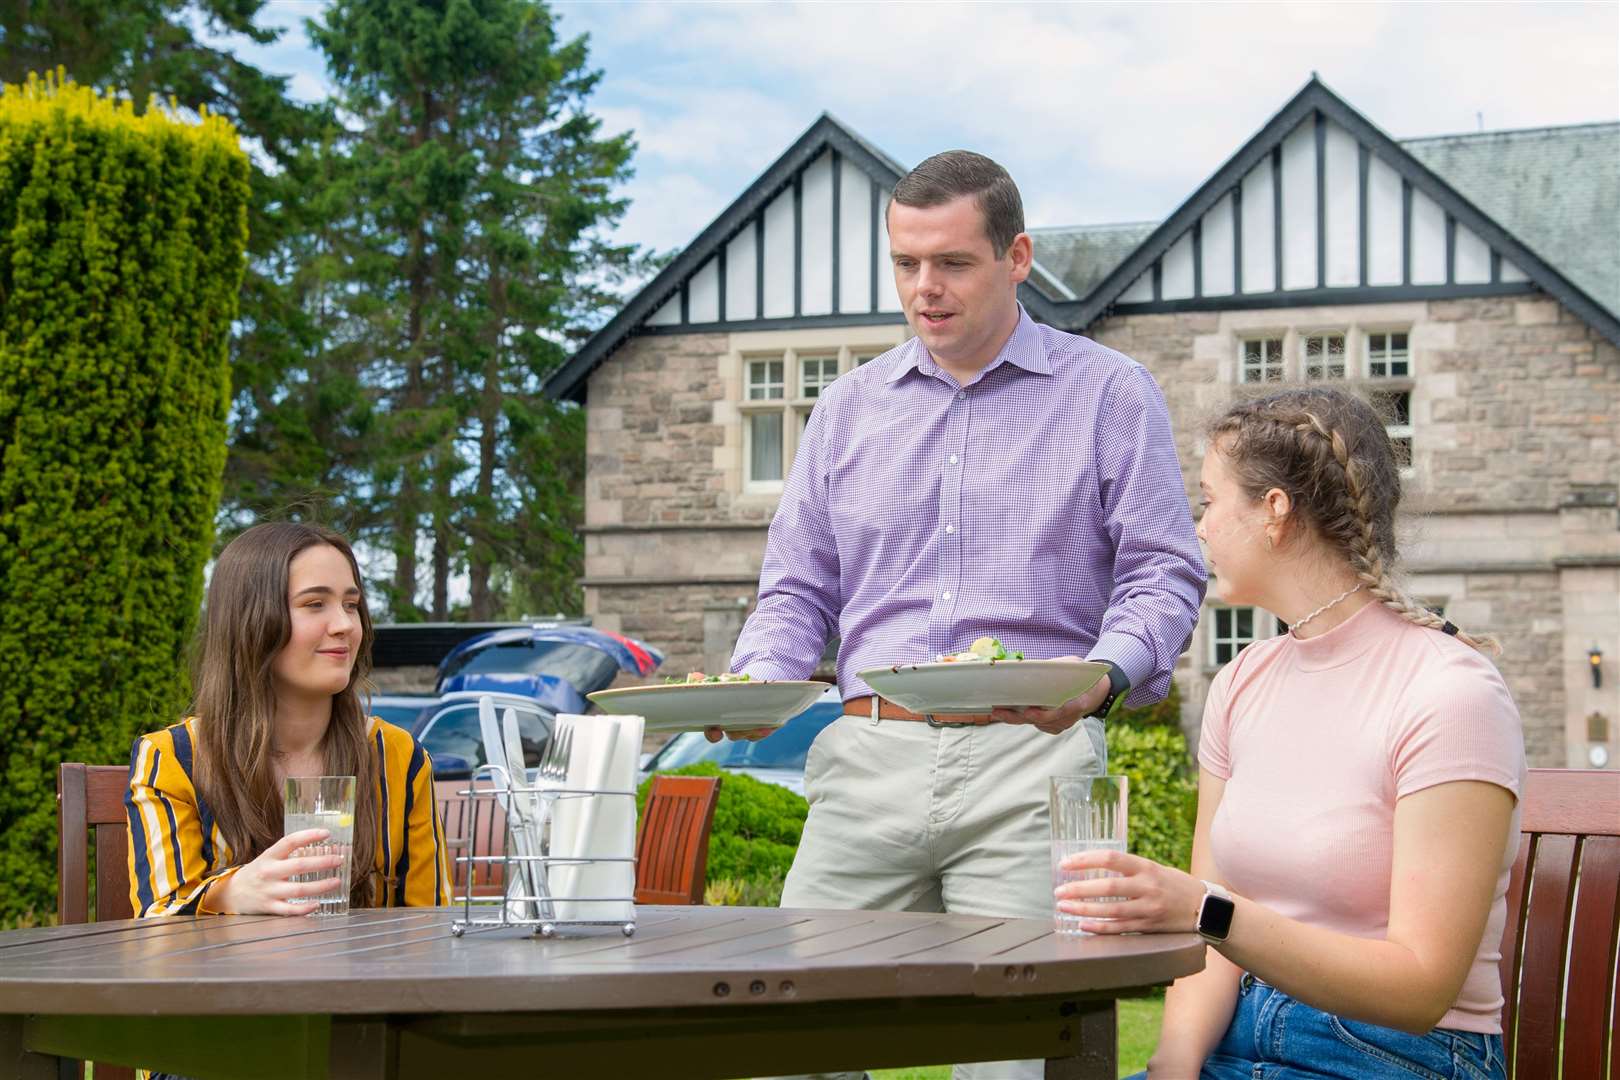 Moray MP Douglas Ross helps the Eat Out to Help Out initiative at Forres' Ramnee Hotel as he serves Hayley Kenna (left) and Heather Anderson (right) their food. Picture: Daniel Forsyth